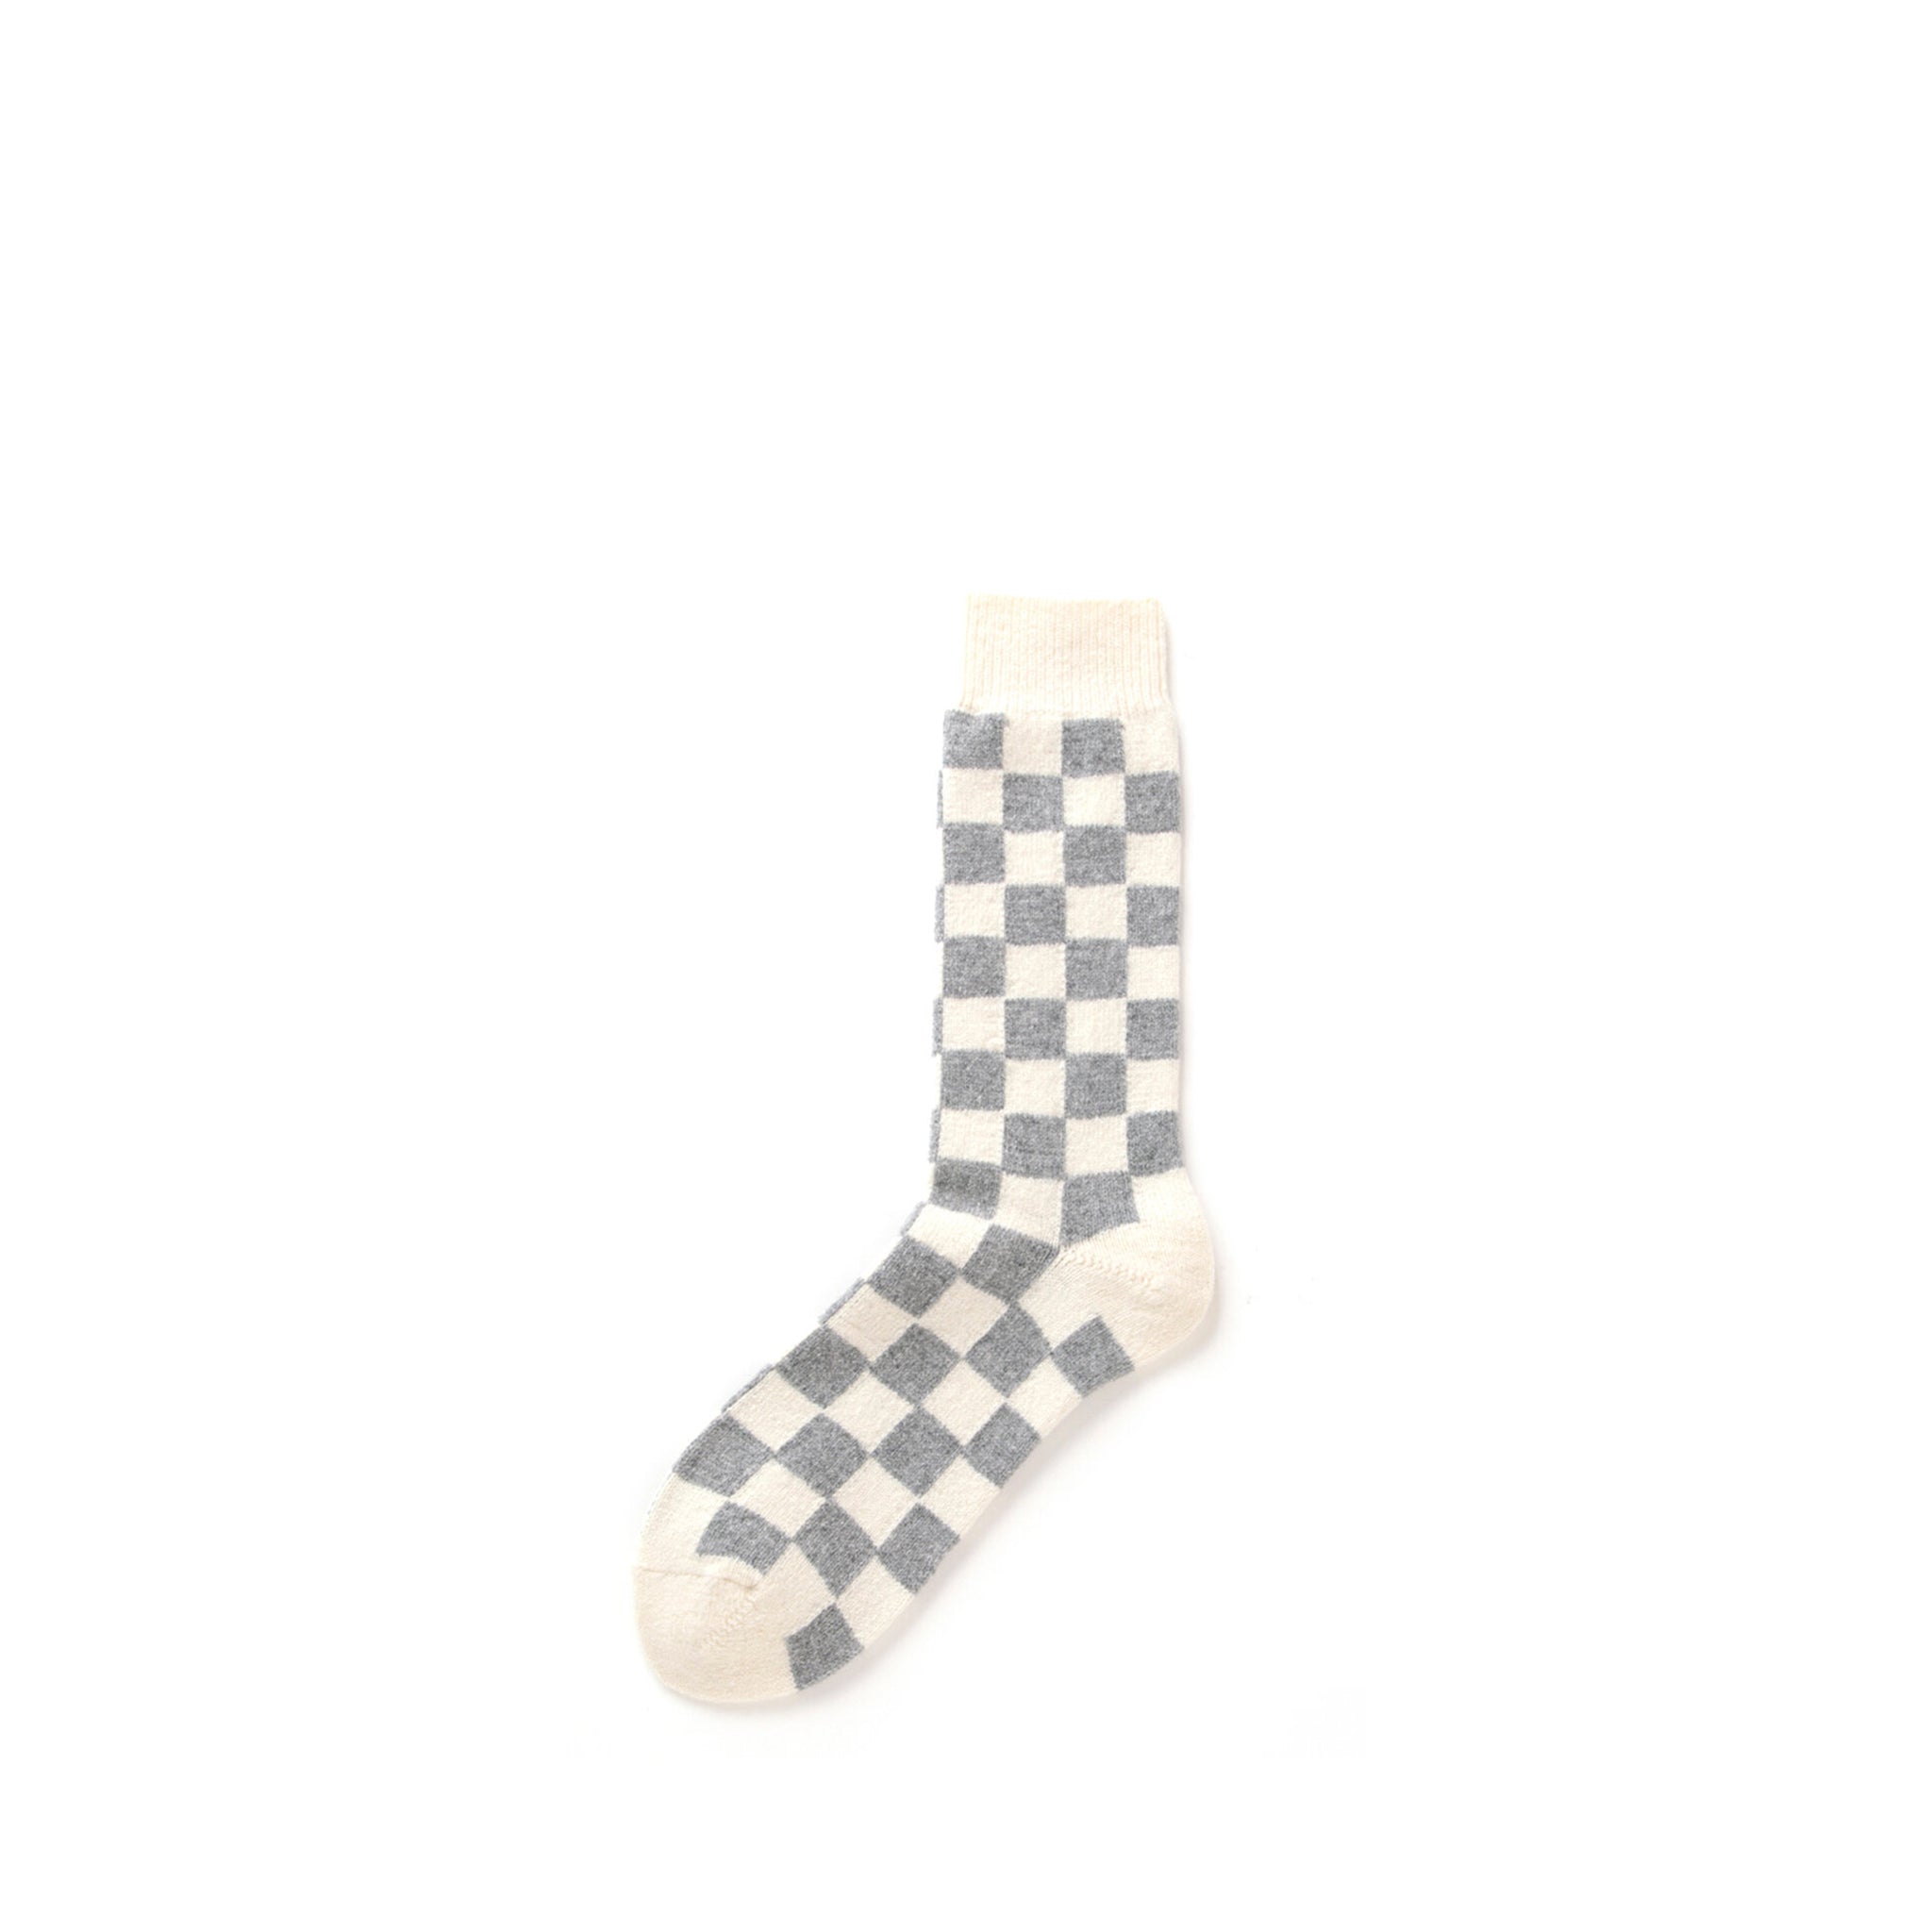 Rototo Recycled Wool Checkerboard Crew Socks: Ivory / Grey - The Union Project